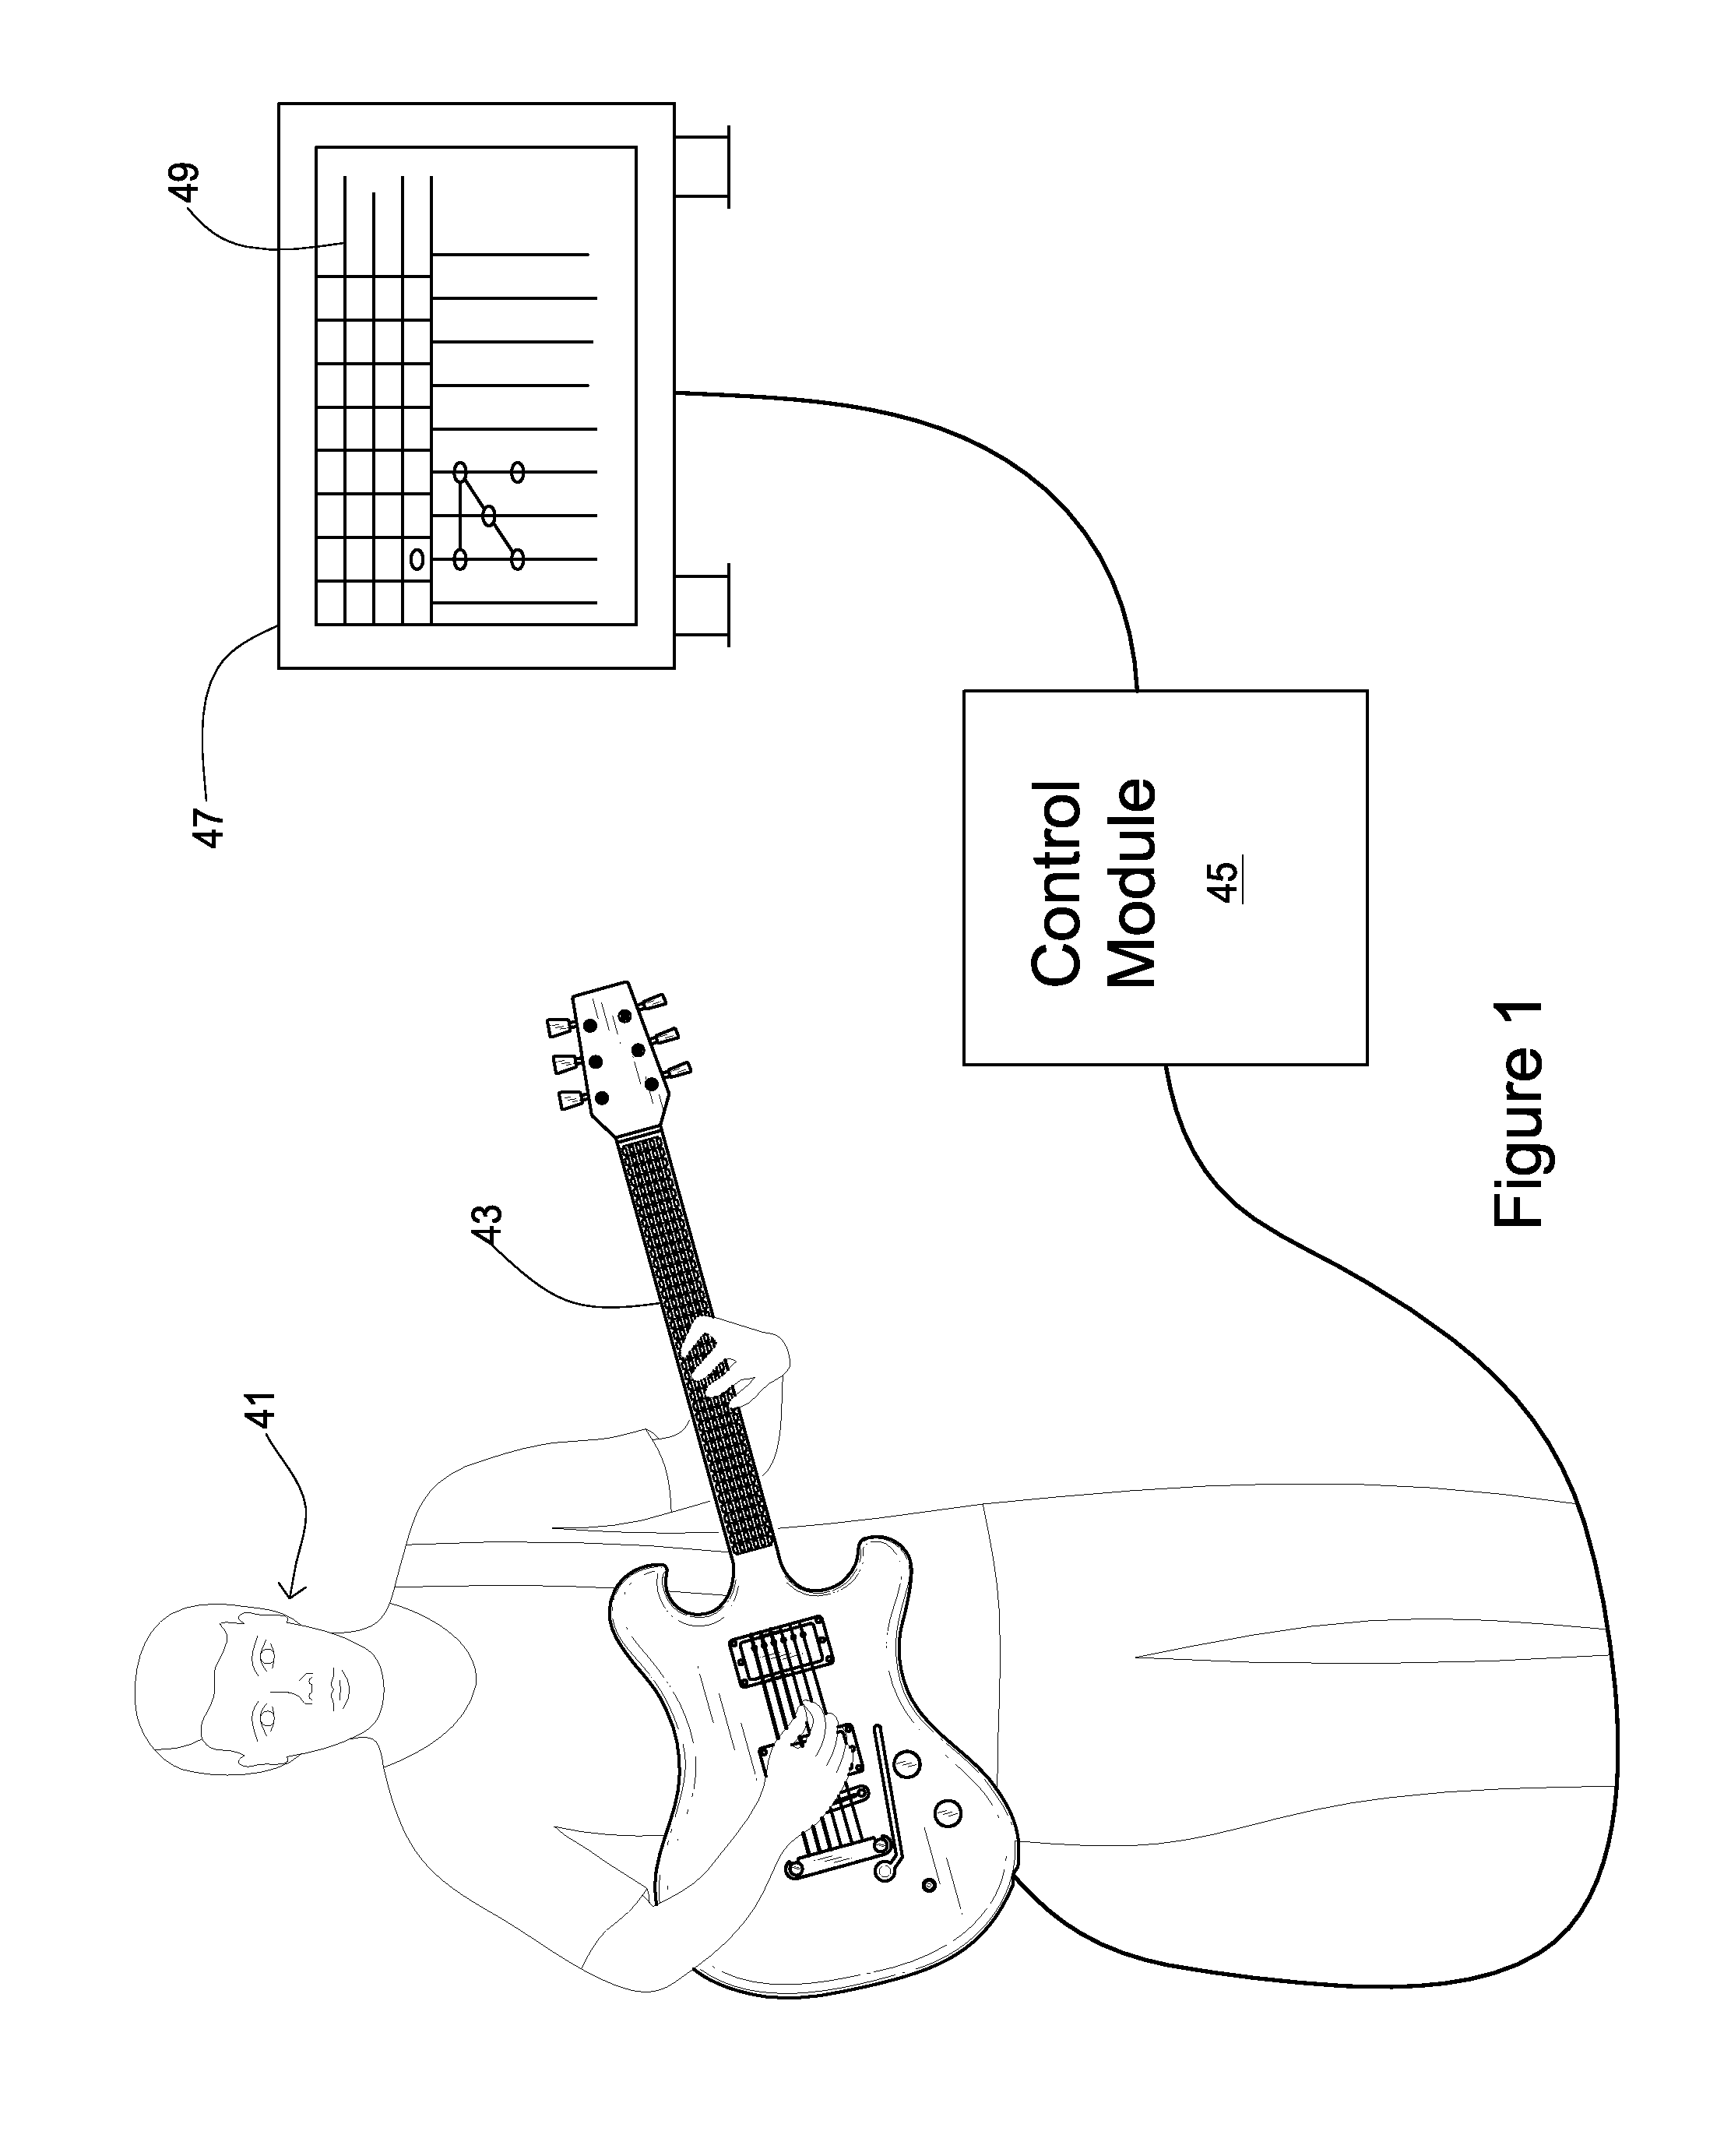 System and Method of Instructing Musical Notation for a Stringed Instrument